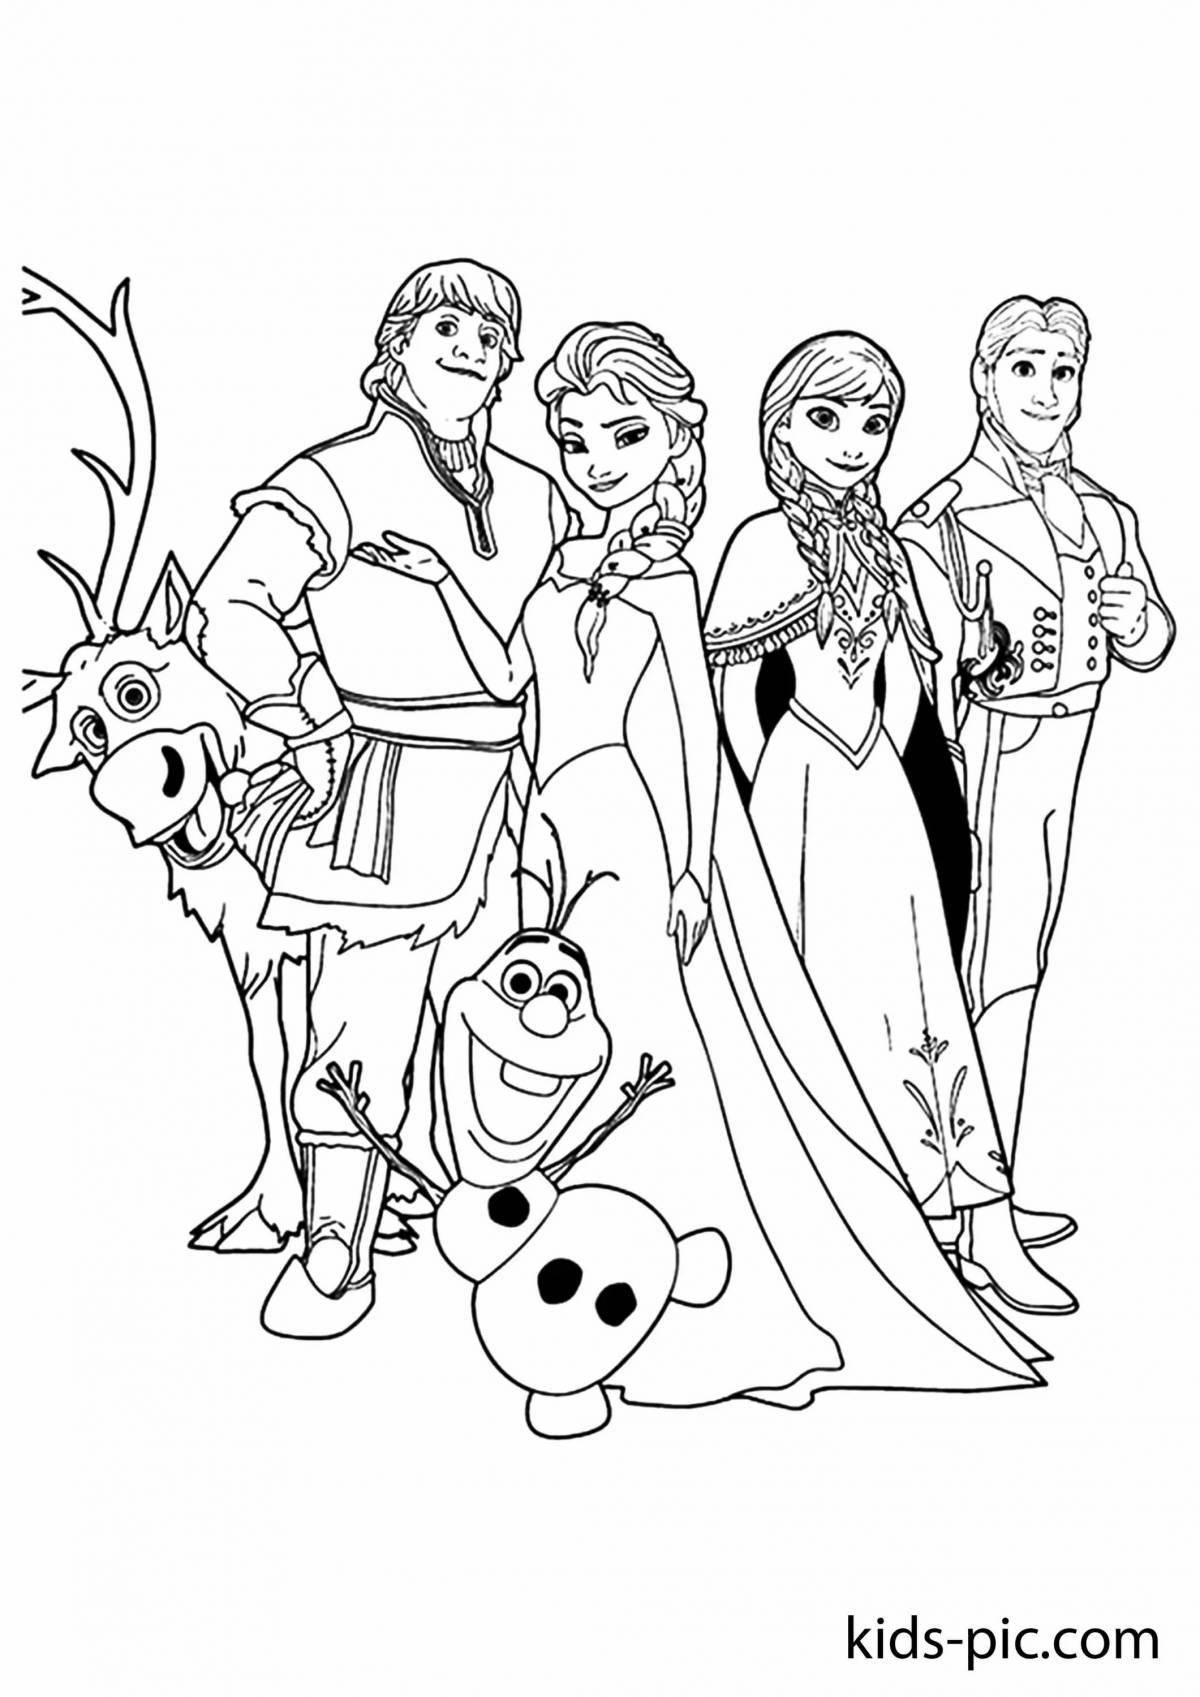 Blessed Anna and Olaf coloring page